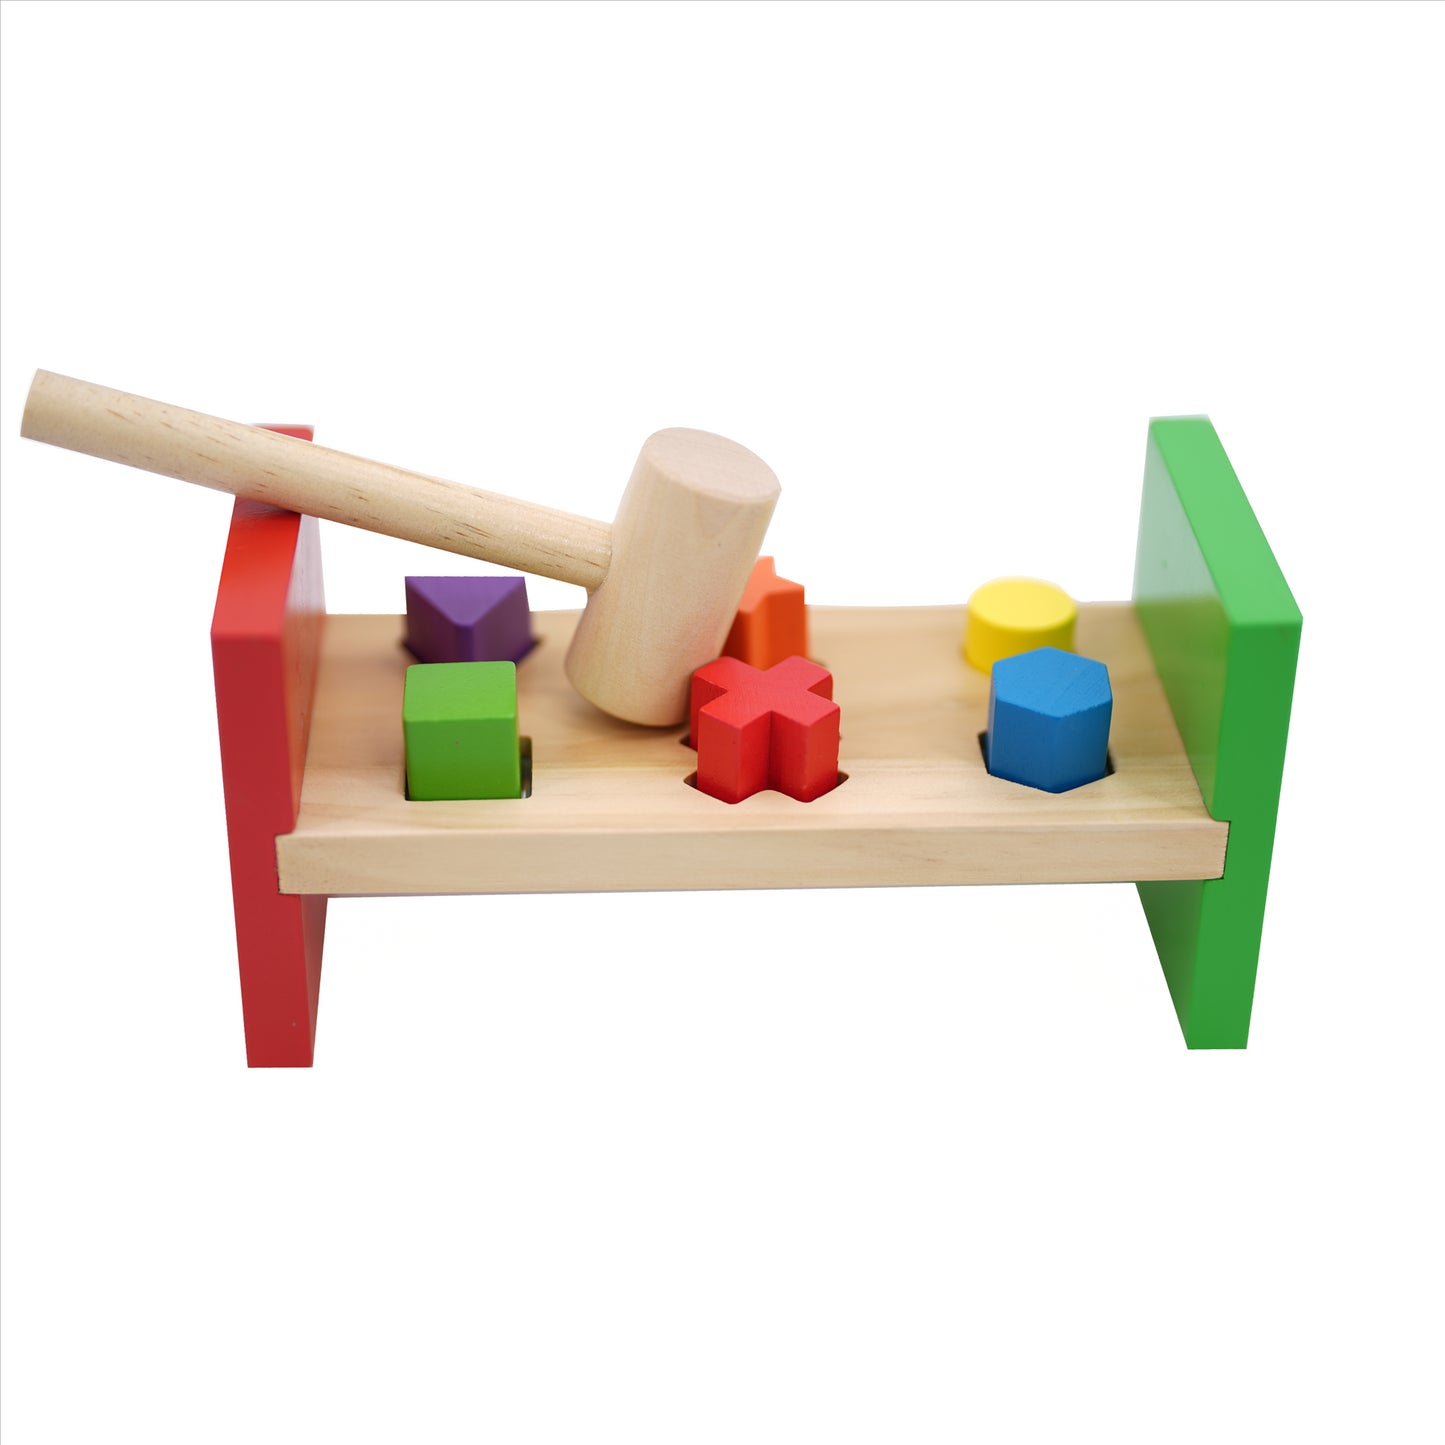 Hammer Pounding Bench Toy by The Magic Toy Shop - UKBuyZone